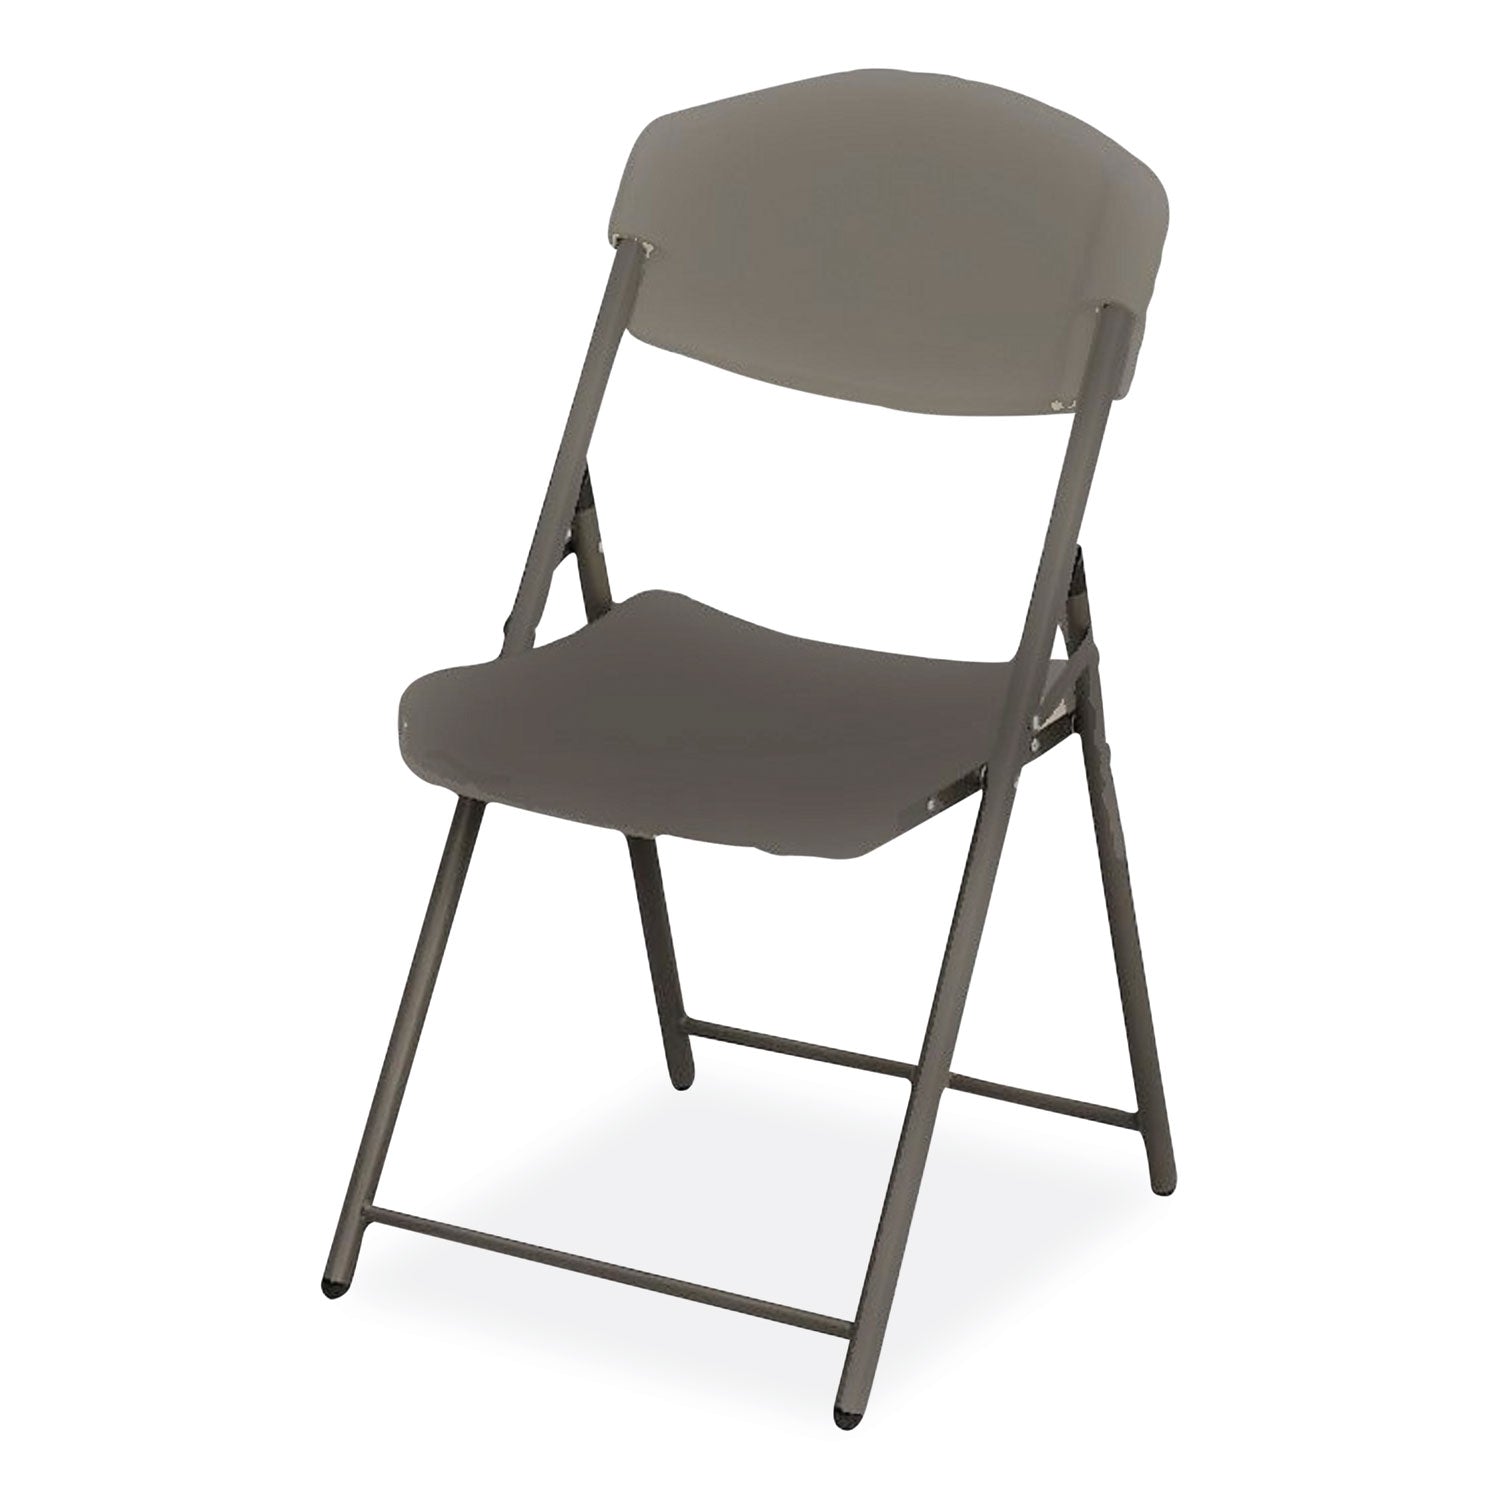 rough-n-ready-commercial-folding-chair-supports-up-to-350-lb-18-seat-height-charcoal-seat-back-charcoal-base-4-pack_ice64037 - 3